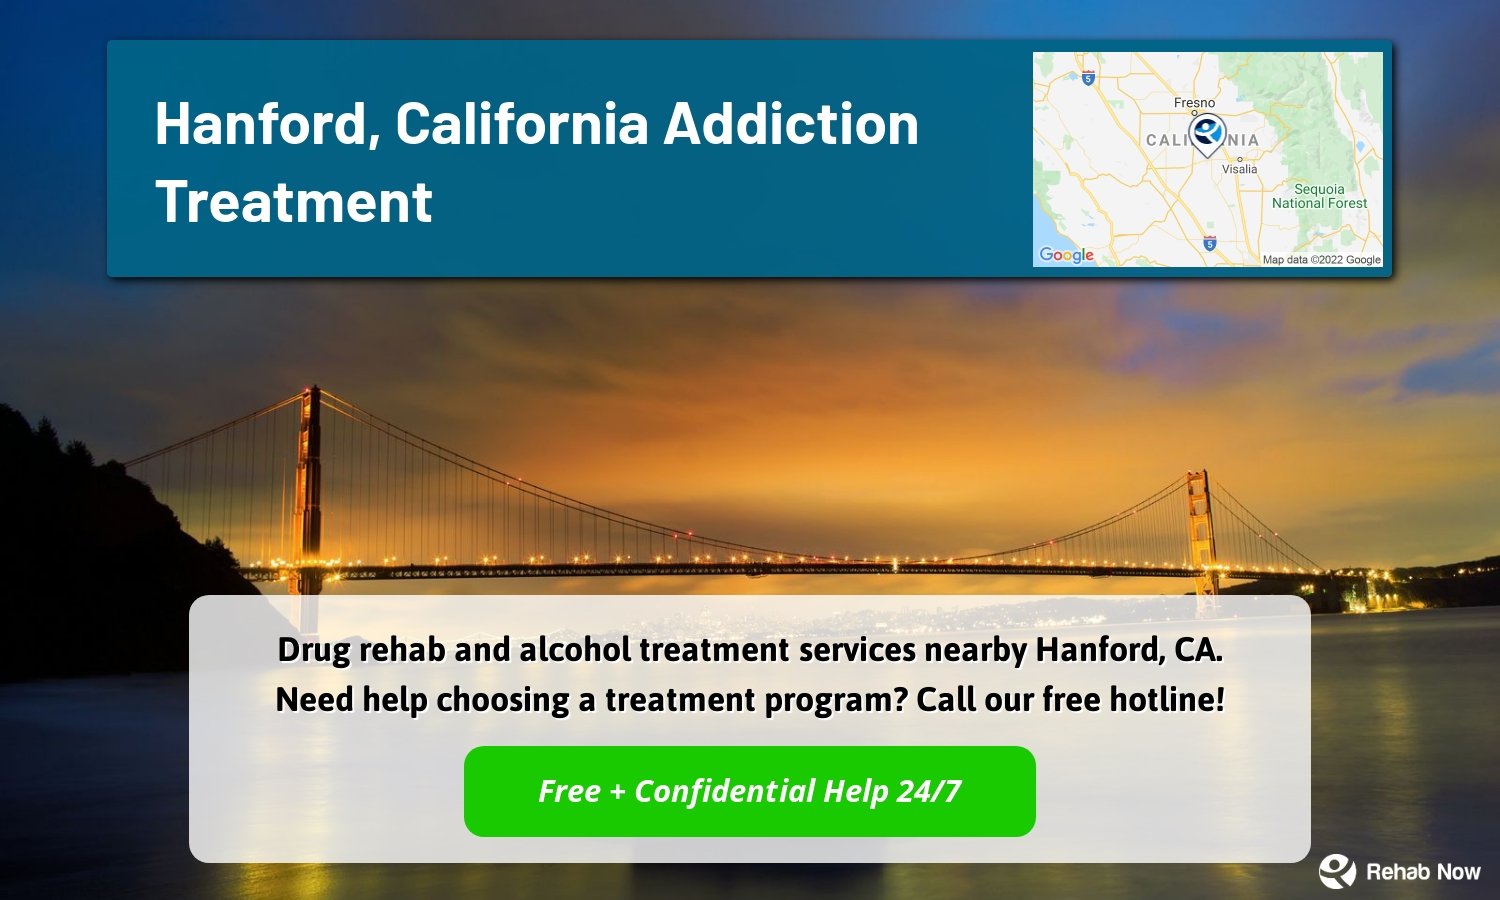 Drug rehab and alcohol treatment services nearby Hanford, CA. Need help choosing a treatment program? Call our free hotline!